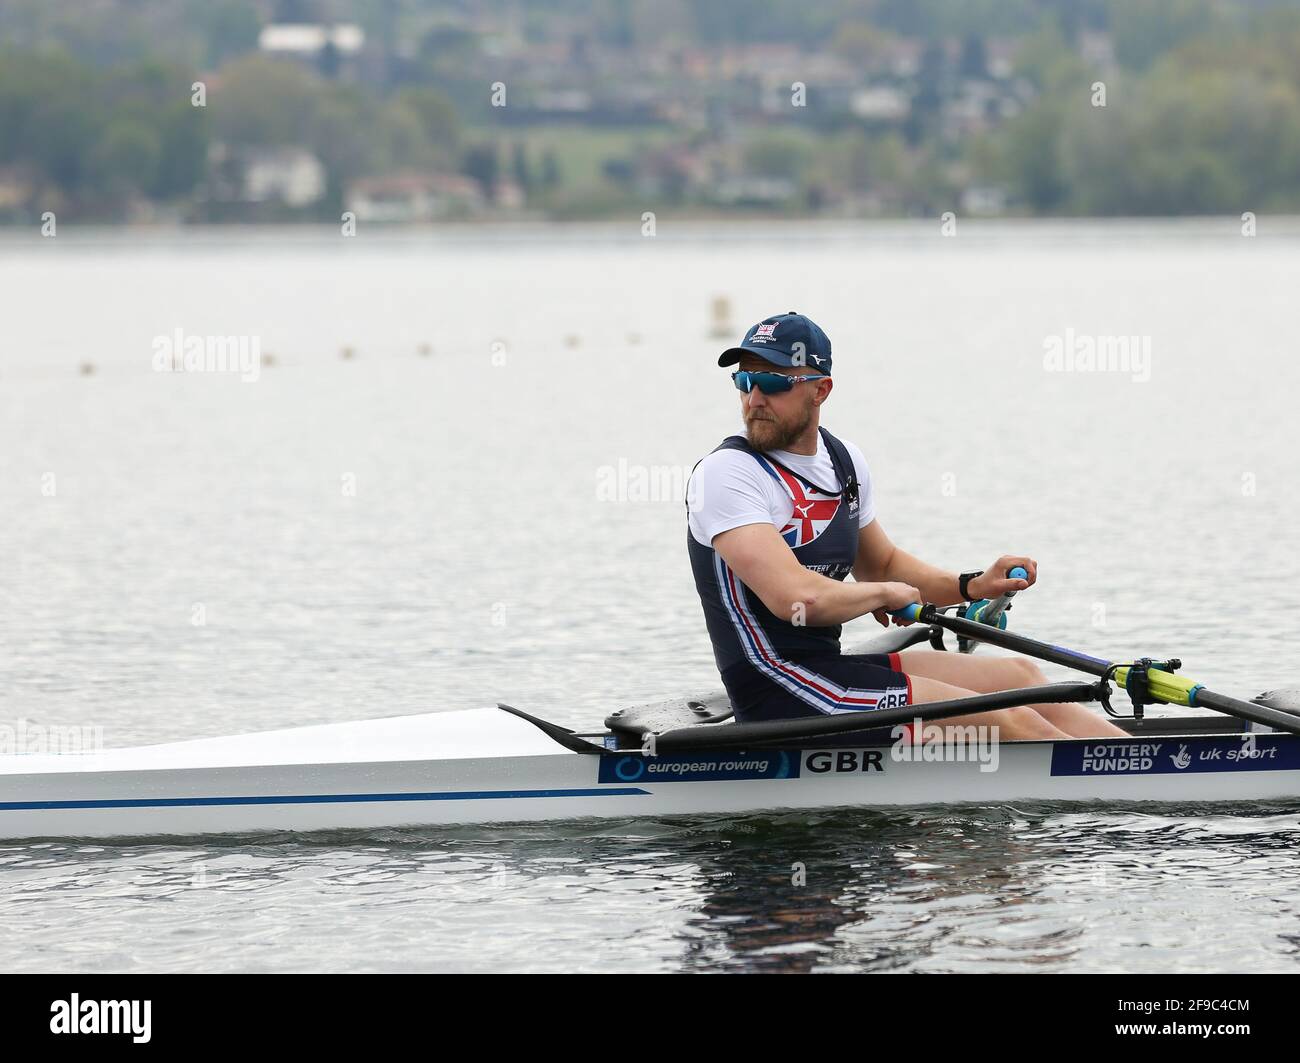 British rower John Collins on Day 2 at the European Rowing Championships in Lake Varese on April 10th 2021 in Varese, Italy Stock Photo